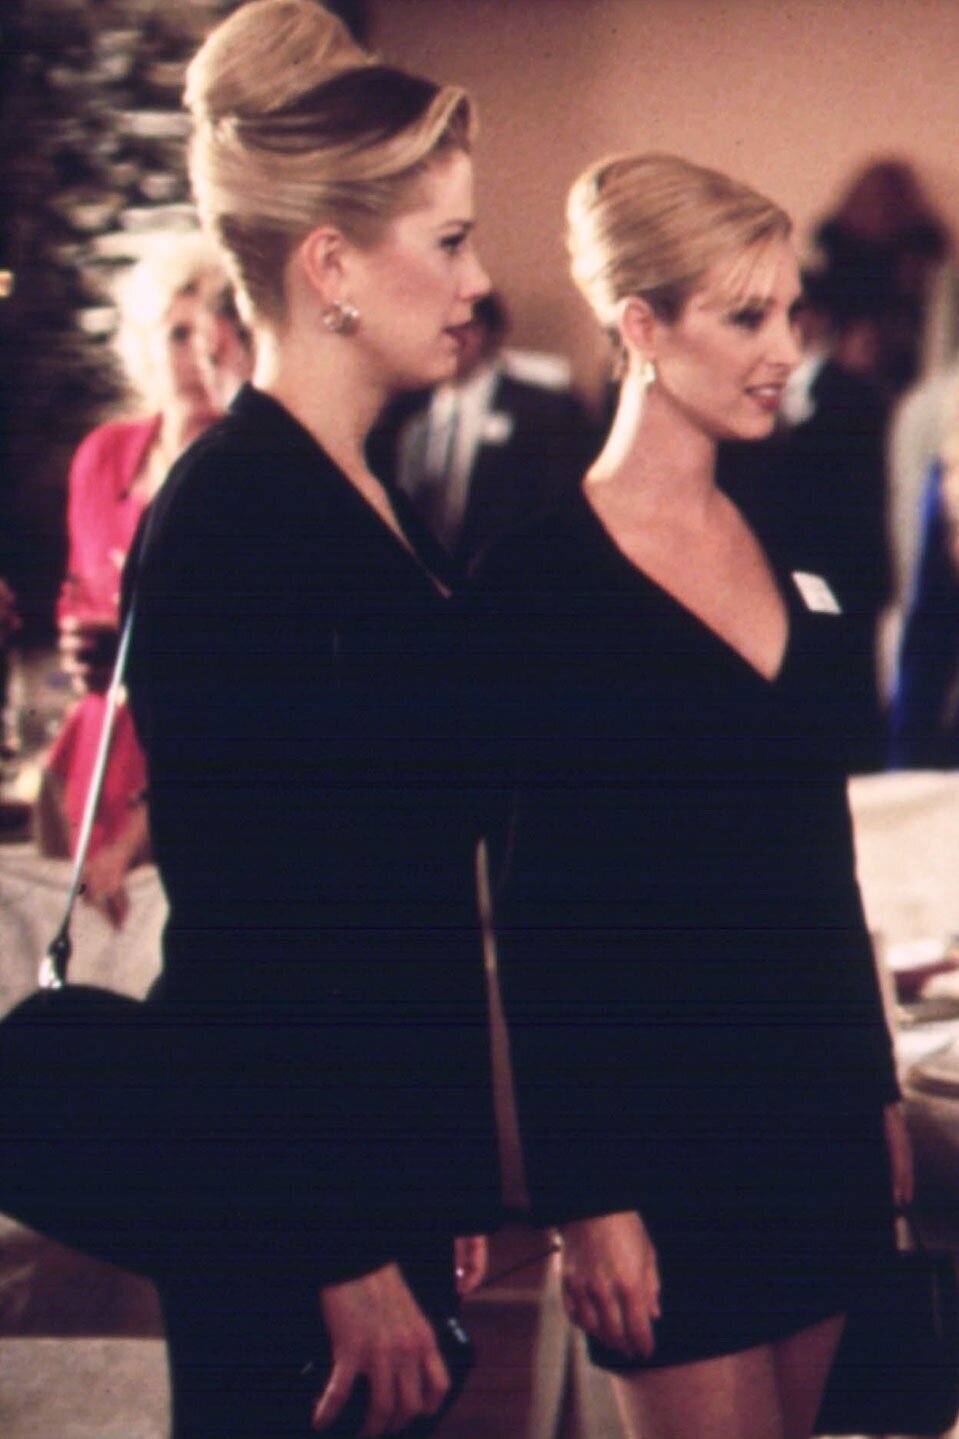 Romy and Michele's black outfits and updos